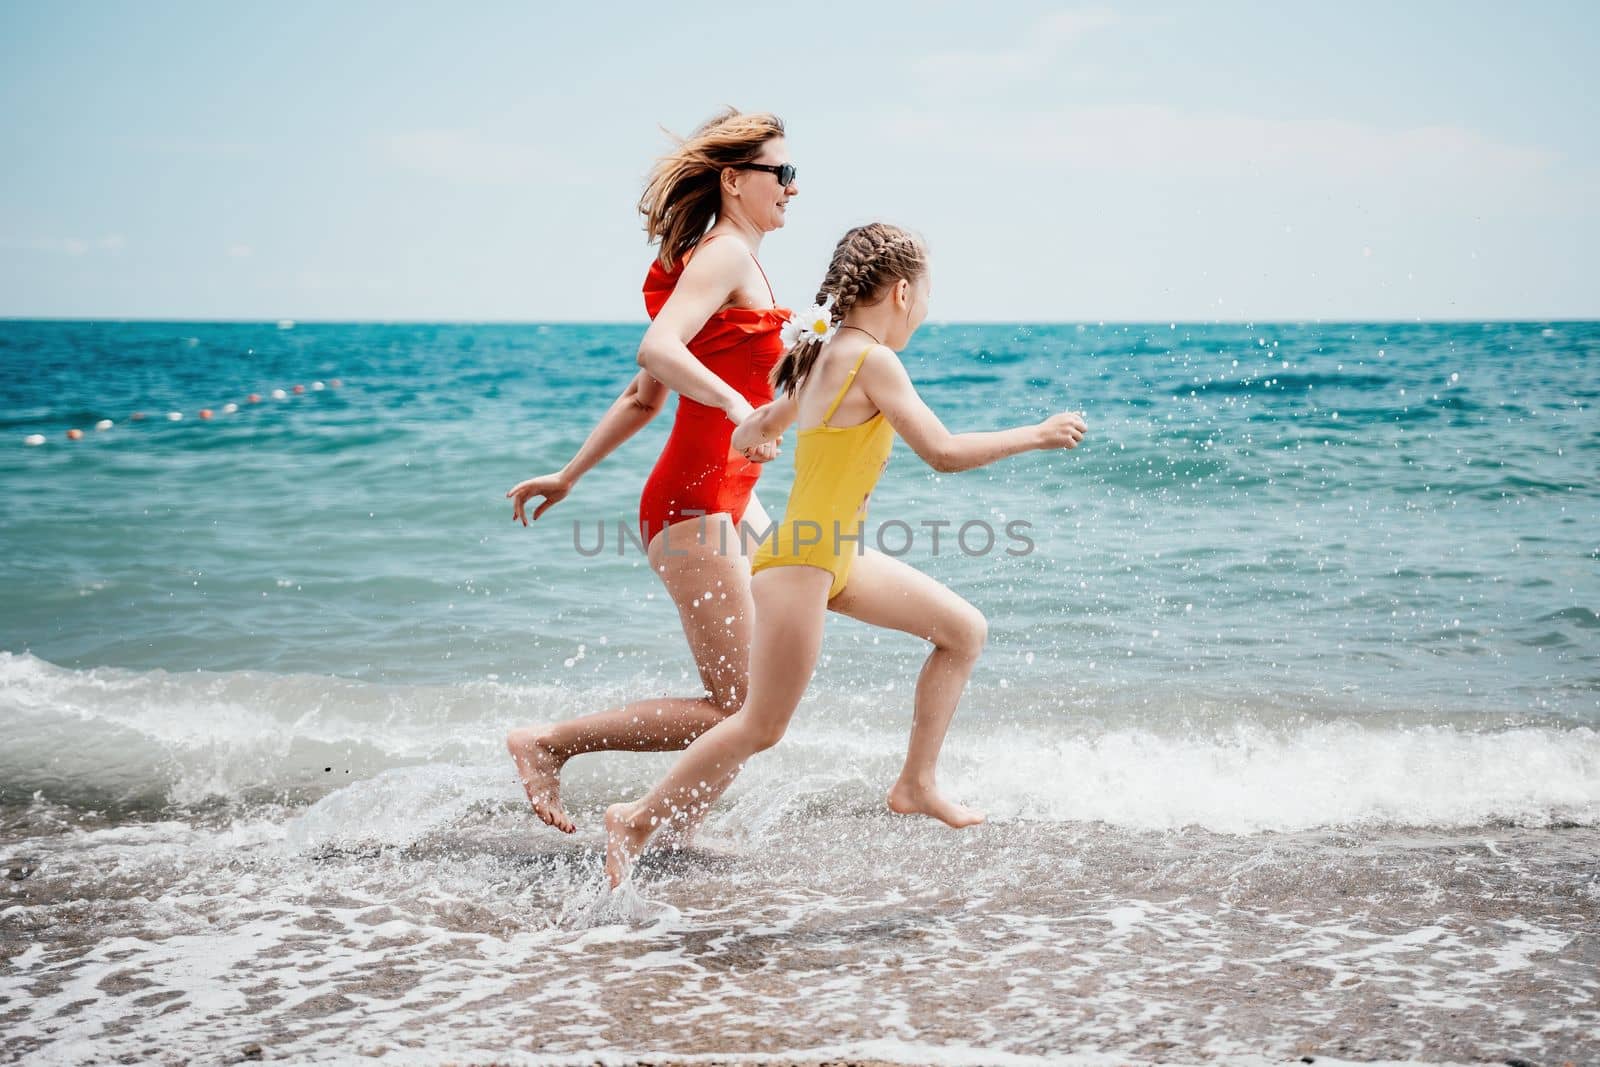 Happy loving family mother and daughter having fun together on the beach. Mum playing with her kid in holiday vacation next to the ocean - Family lifestyle and love concept.